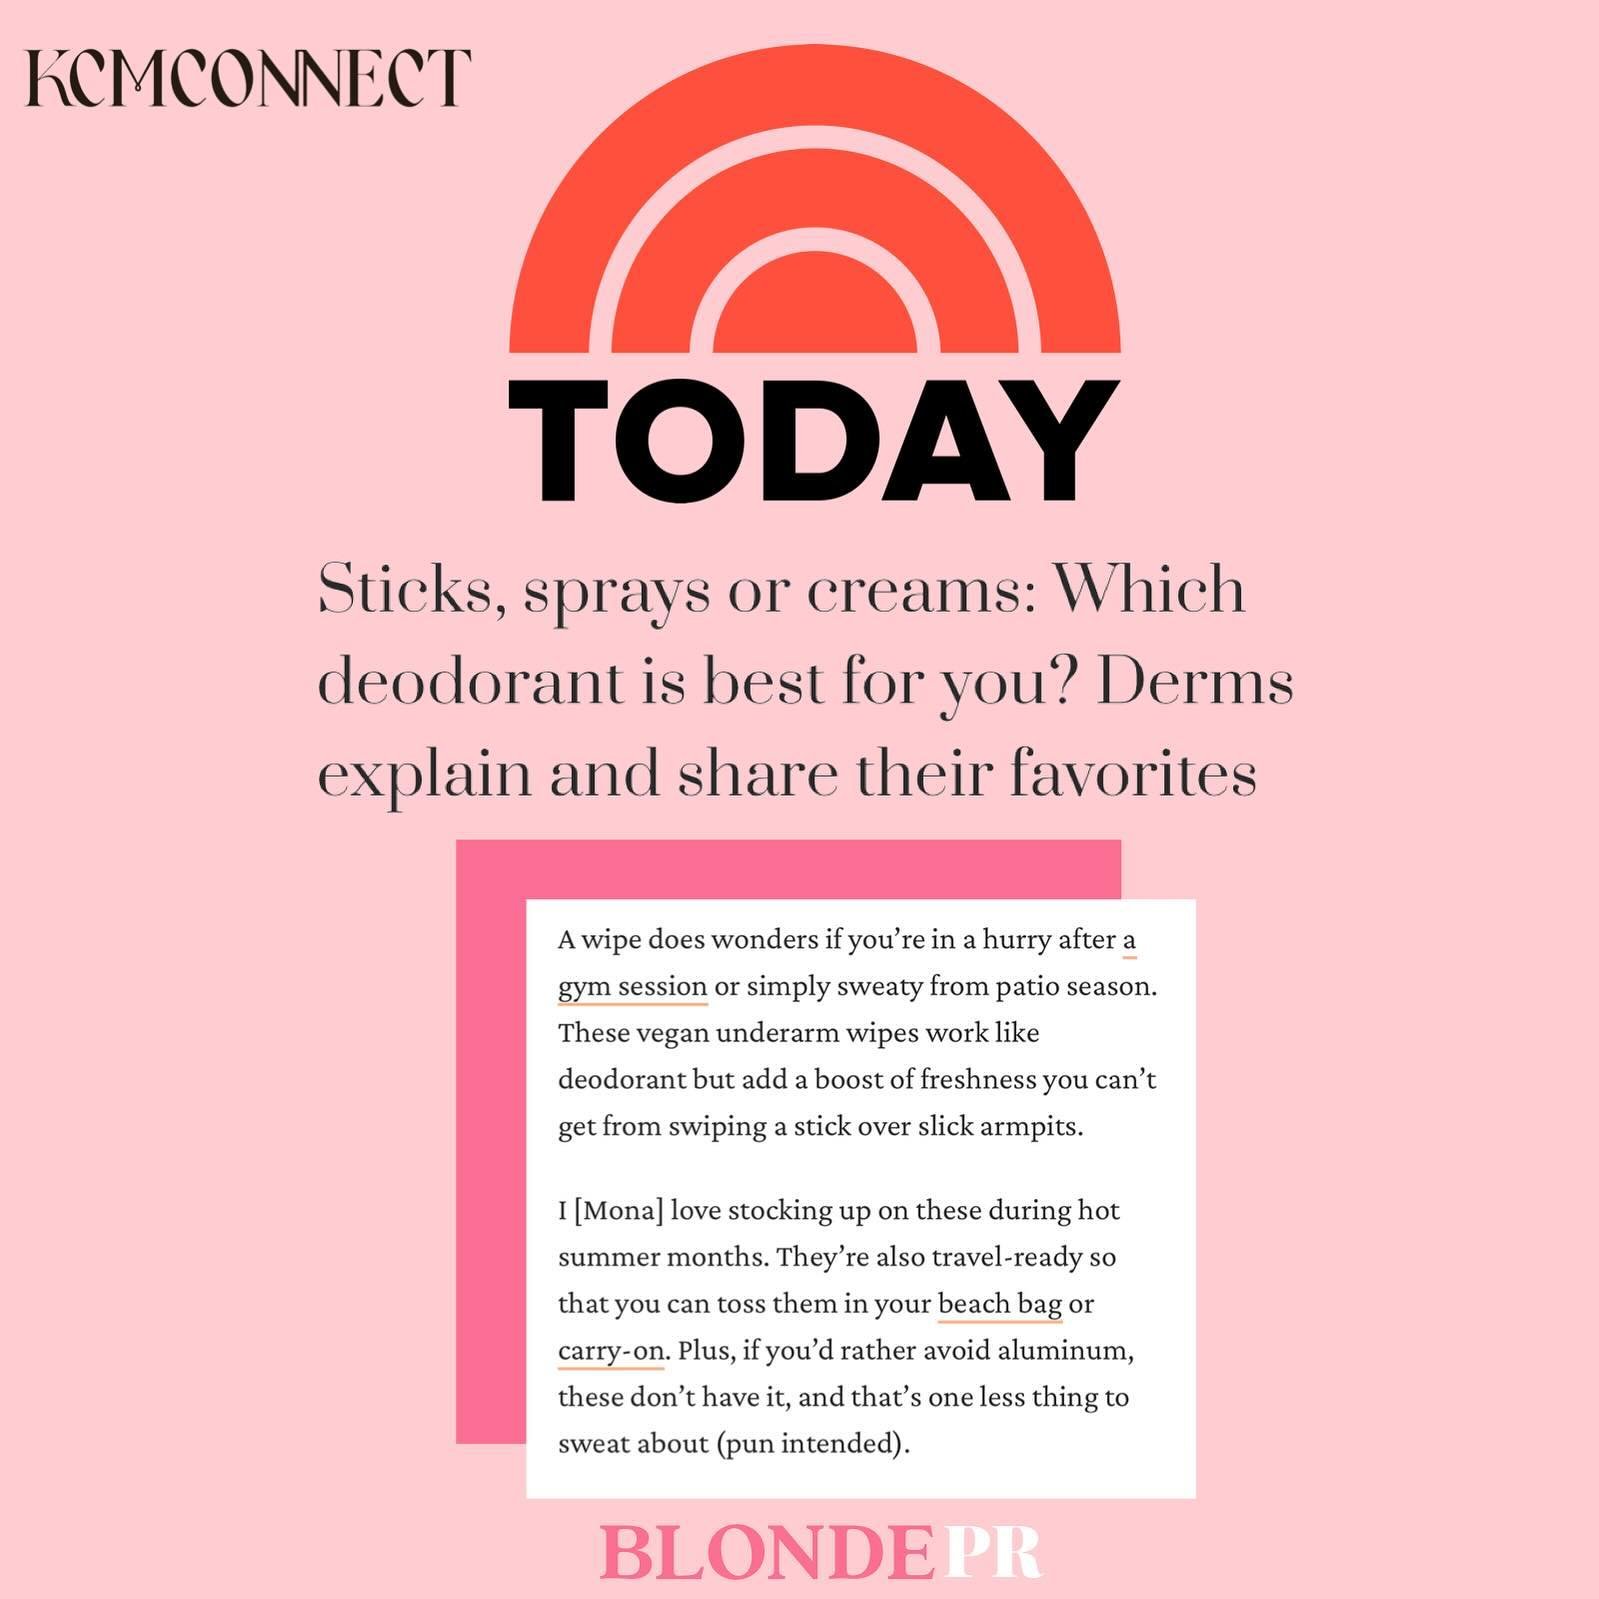 We&rsquo;re loving Pacifica Beauty&rsquo;s Underarm Deodorant Wipes with Coconut Milk &amp; Essential Oils going into summer months for an easy touch up whenever, wherever - featured in @todayshow ☀️

@blondepublicrelations x @kcmconnectpr 

#blondep